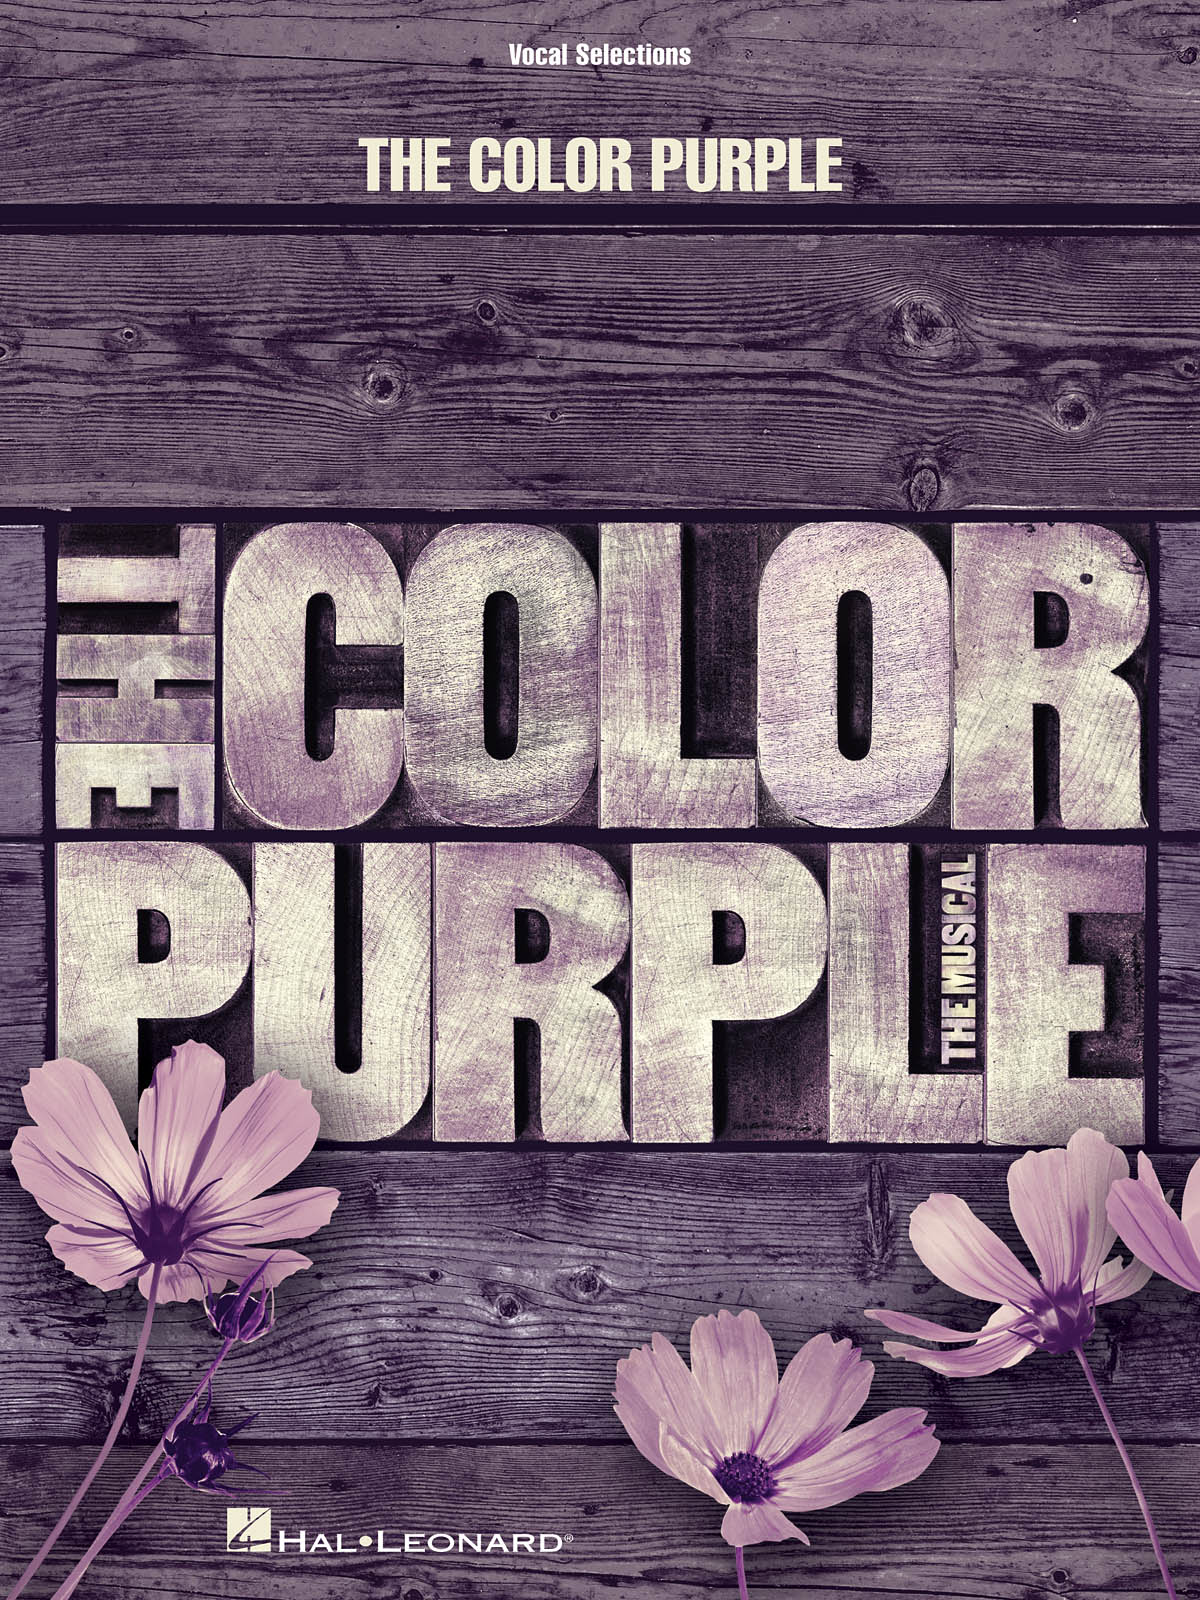 Brenda Russell Allee Willis Stephen Bray: The Color Purple: The Musical: Vocal